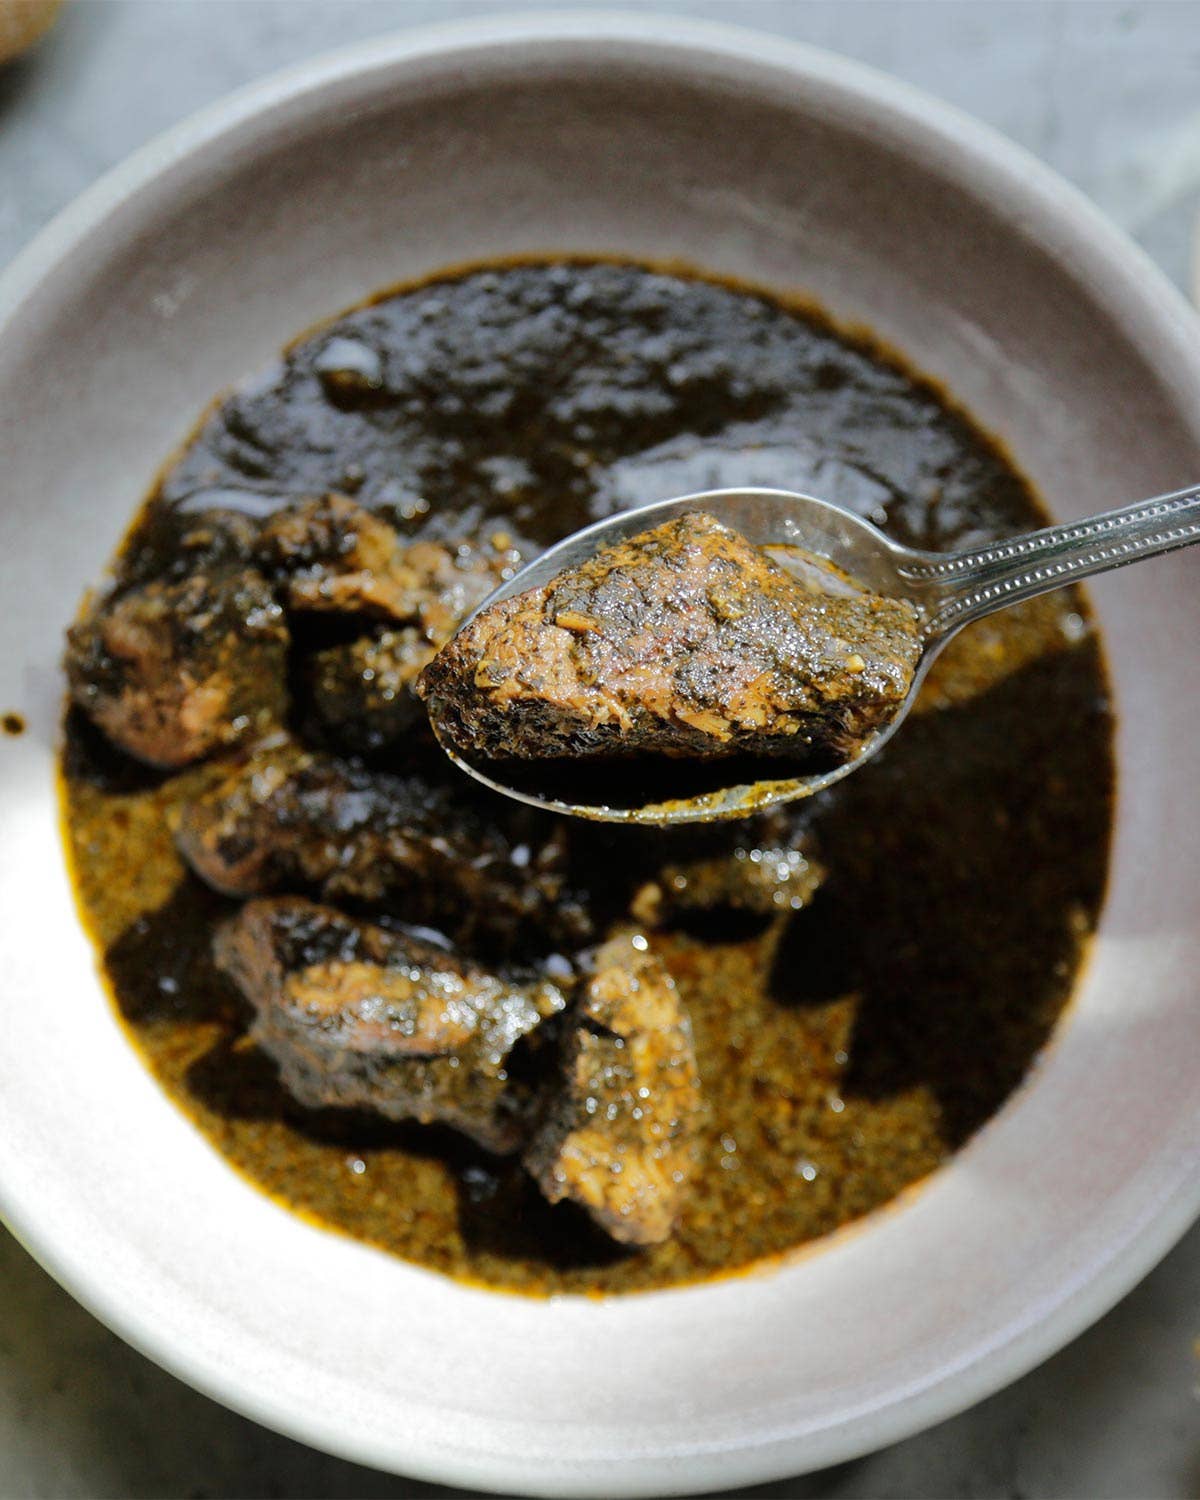 Tunisian Braised Veal With Dried Greens (Tunisian Molokhia)